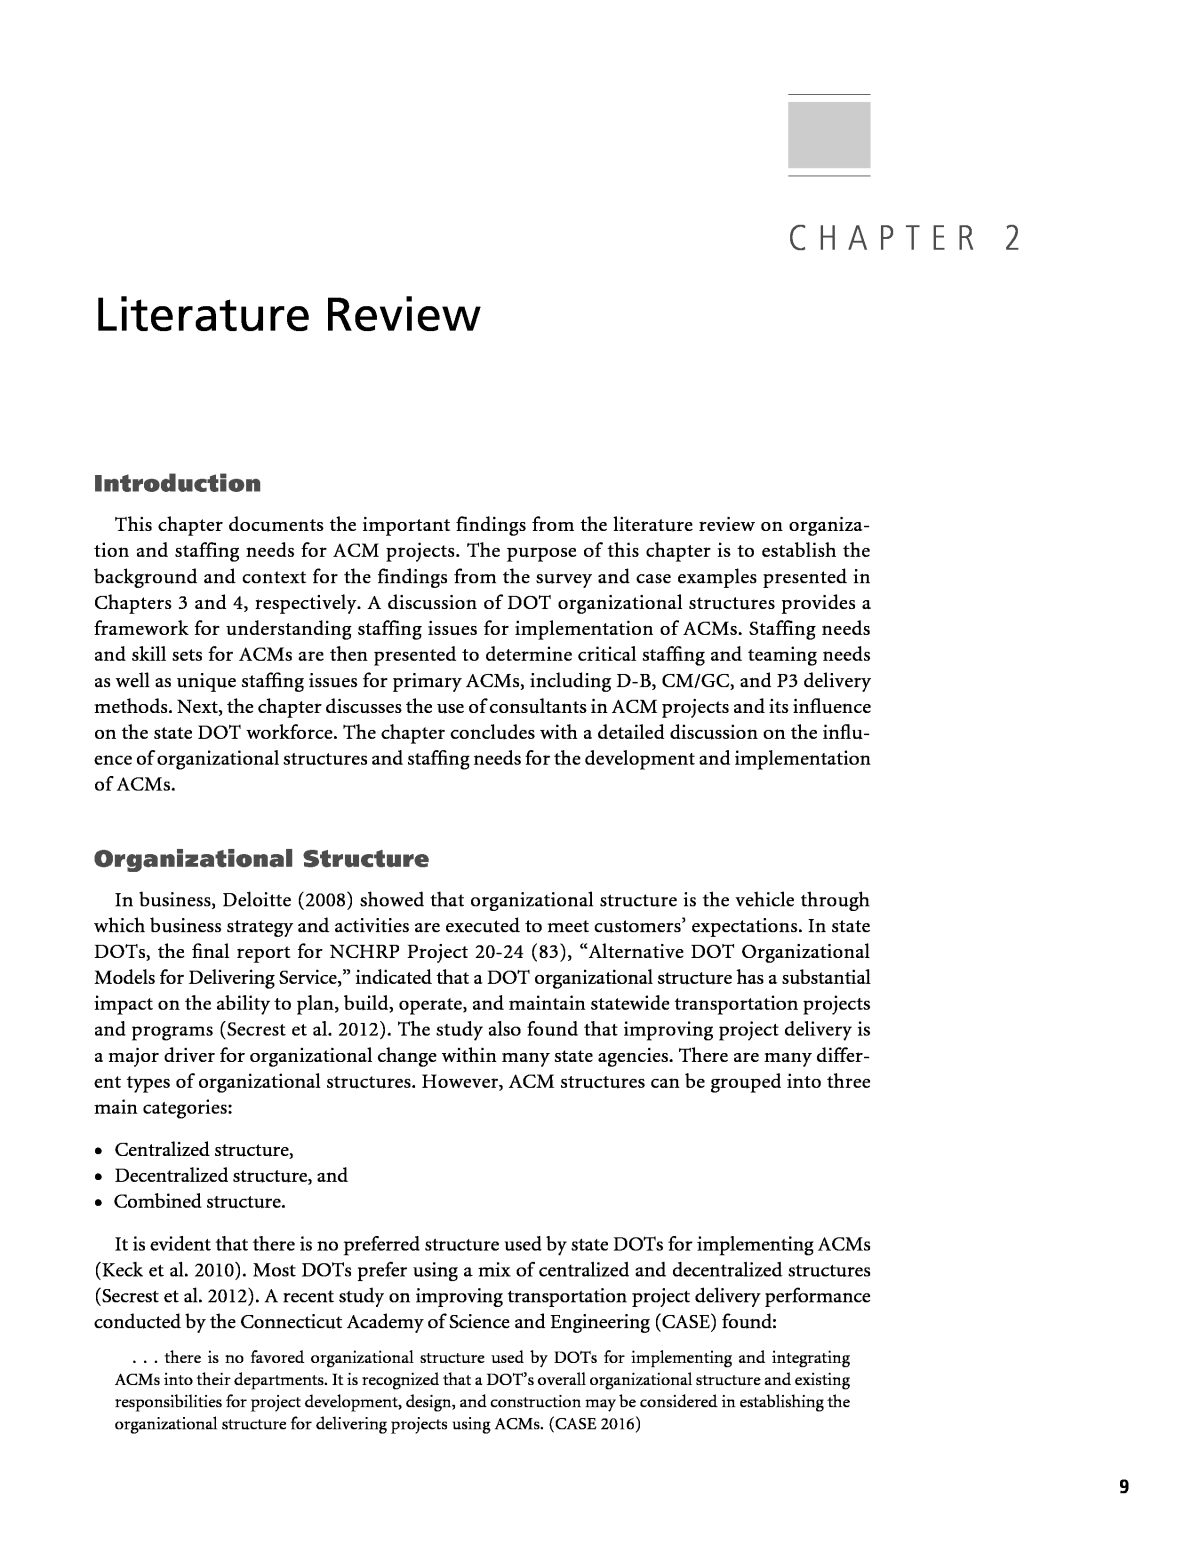 literature review chapter 2 pdf